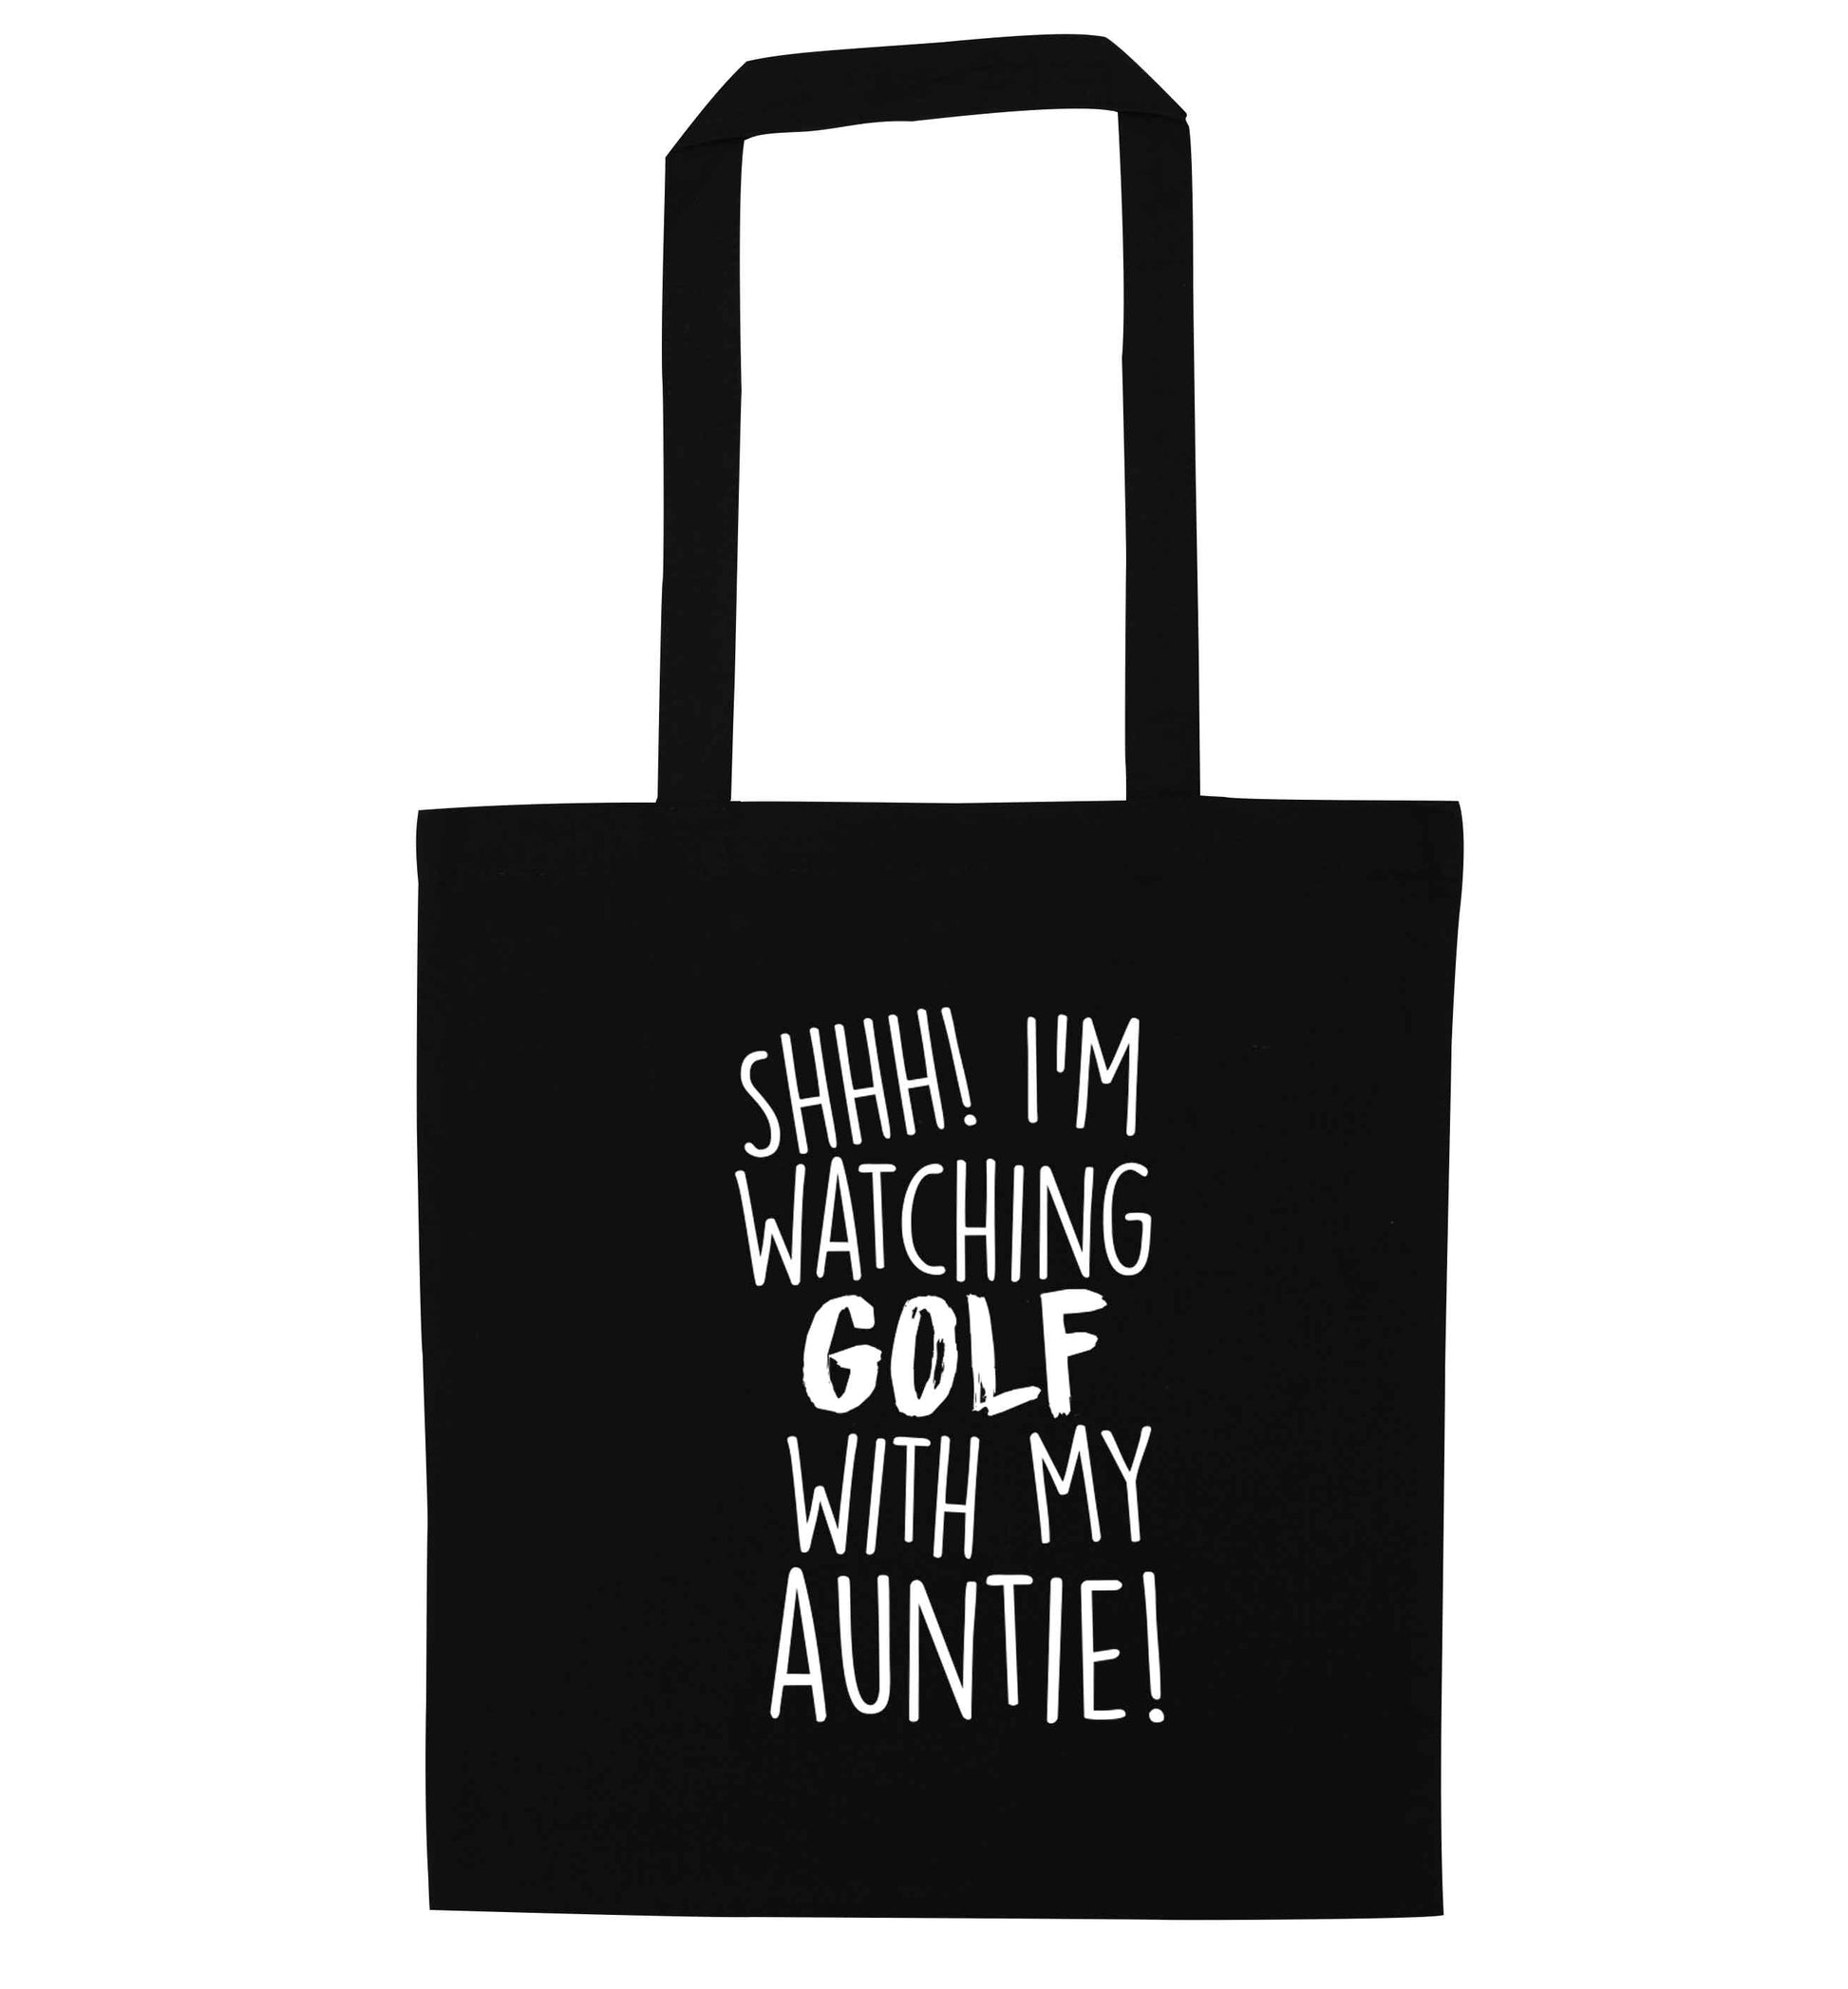 Shh I'm watching golf with my auntie black tote bag